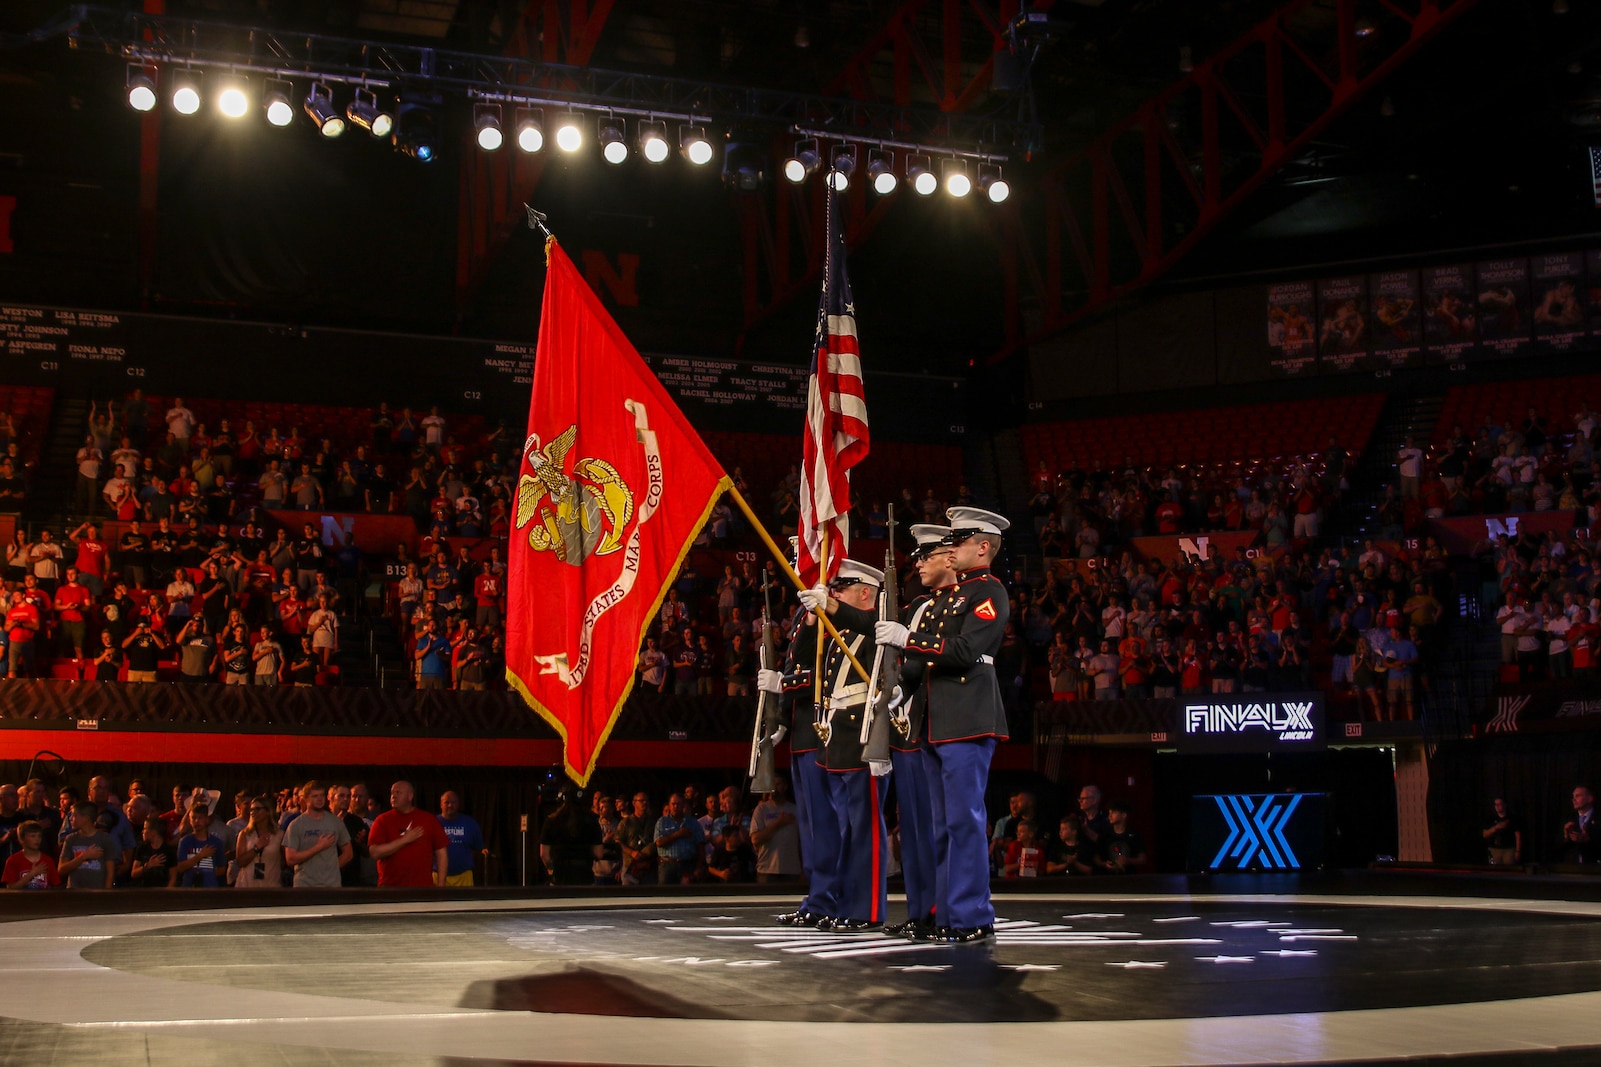 Marines with Detachment 1, Maintenance Company, 4th Marine Logistics Group, present the colors during the FinalX Senior Freestyle World Team Trials at Bob Devaney Sports Center in Lincoln, Neb. June 9, 2018.